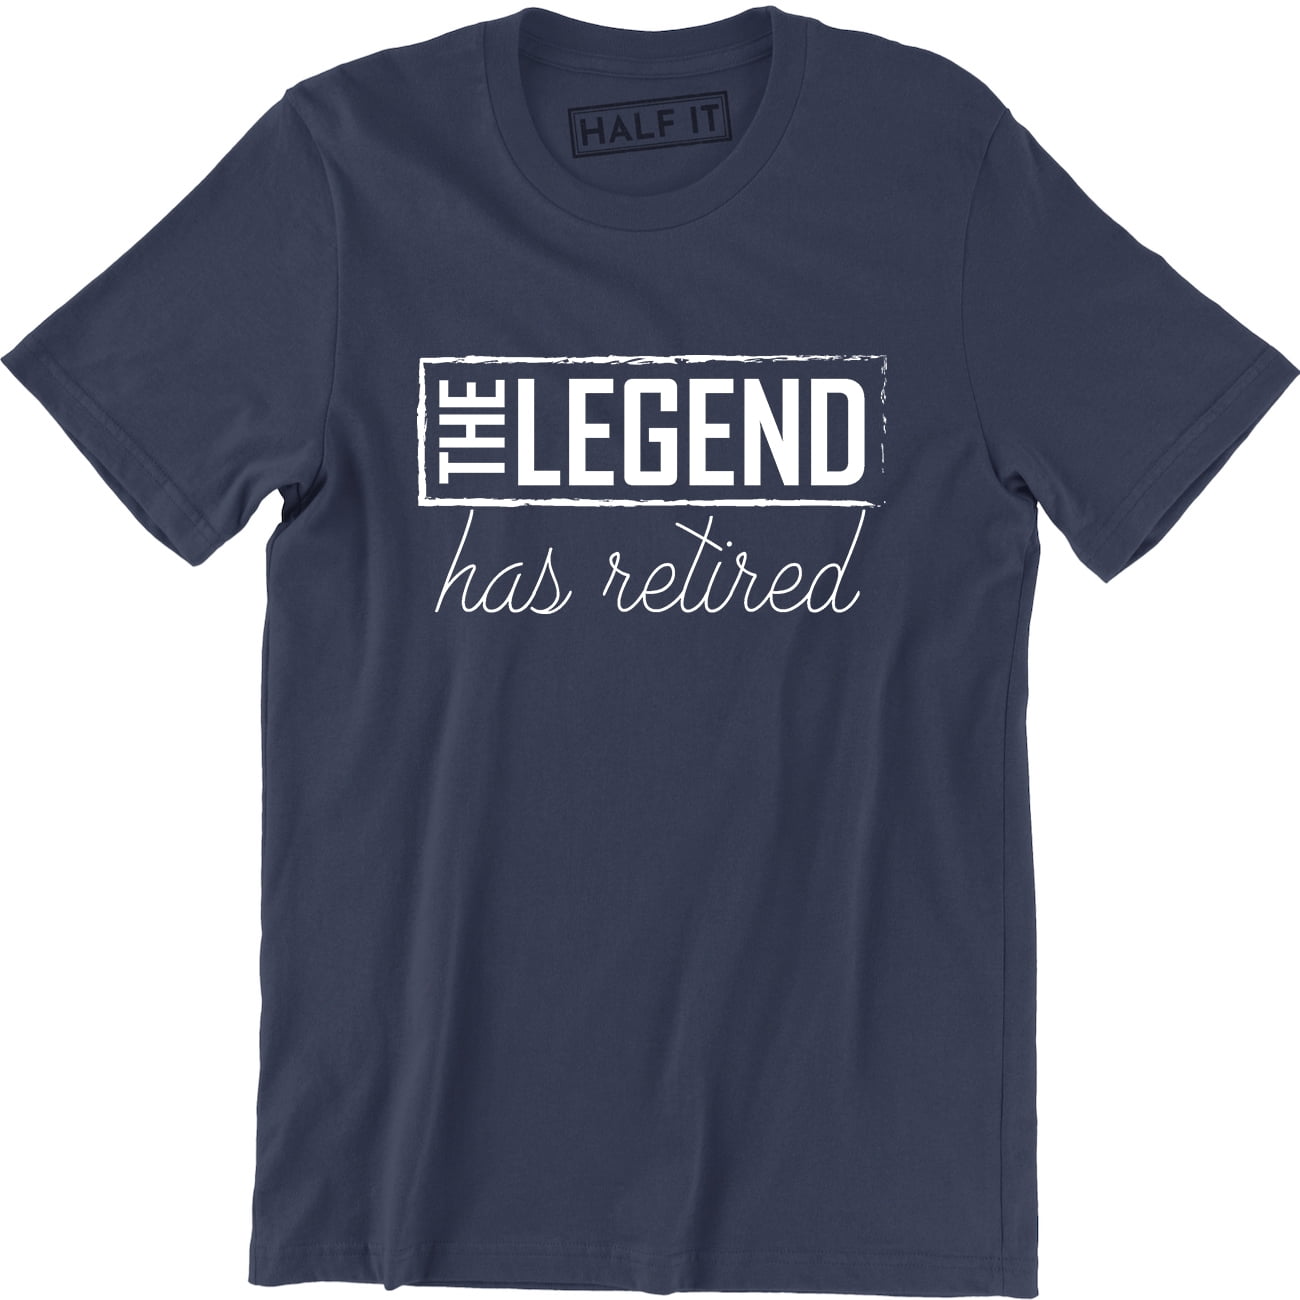 Funny Mens T-Shirts Novelty. The Legend has retired..dad tee shirt present